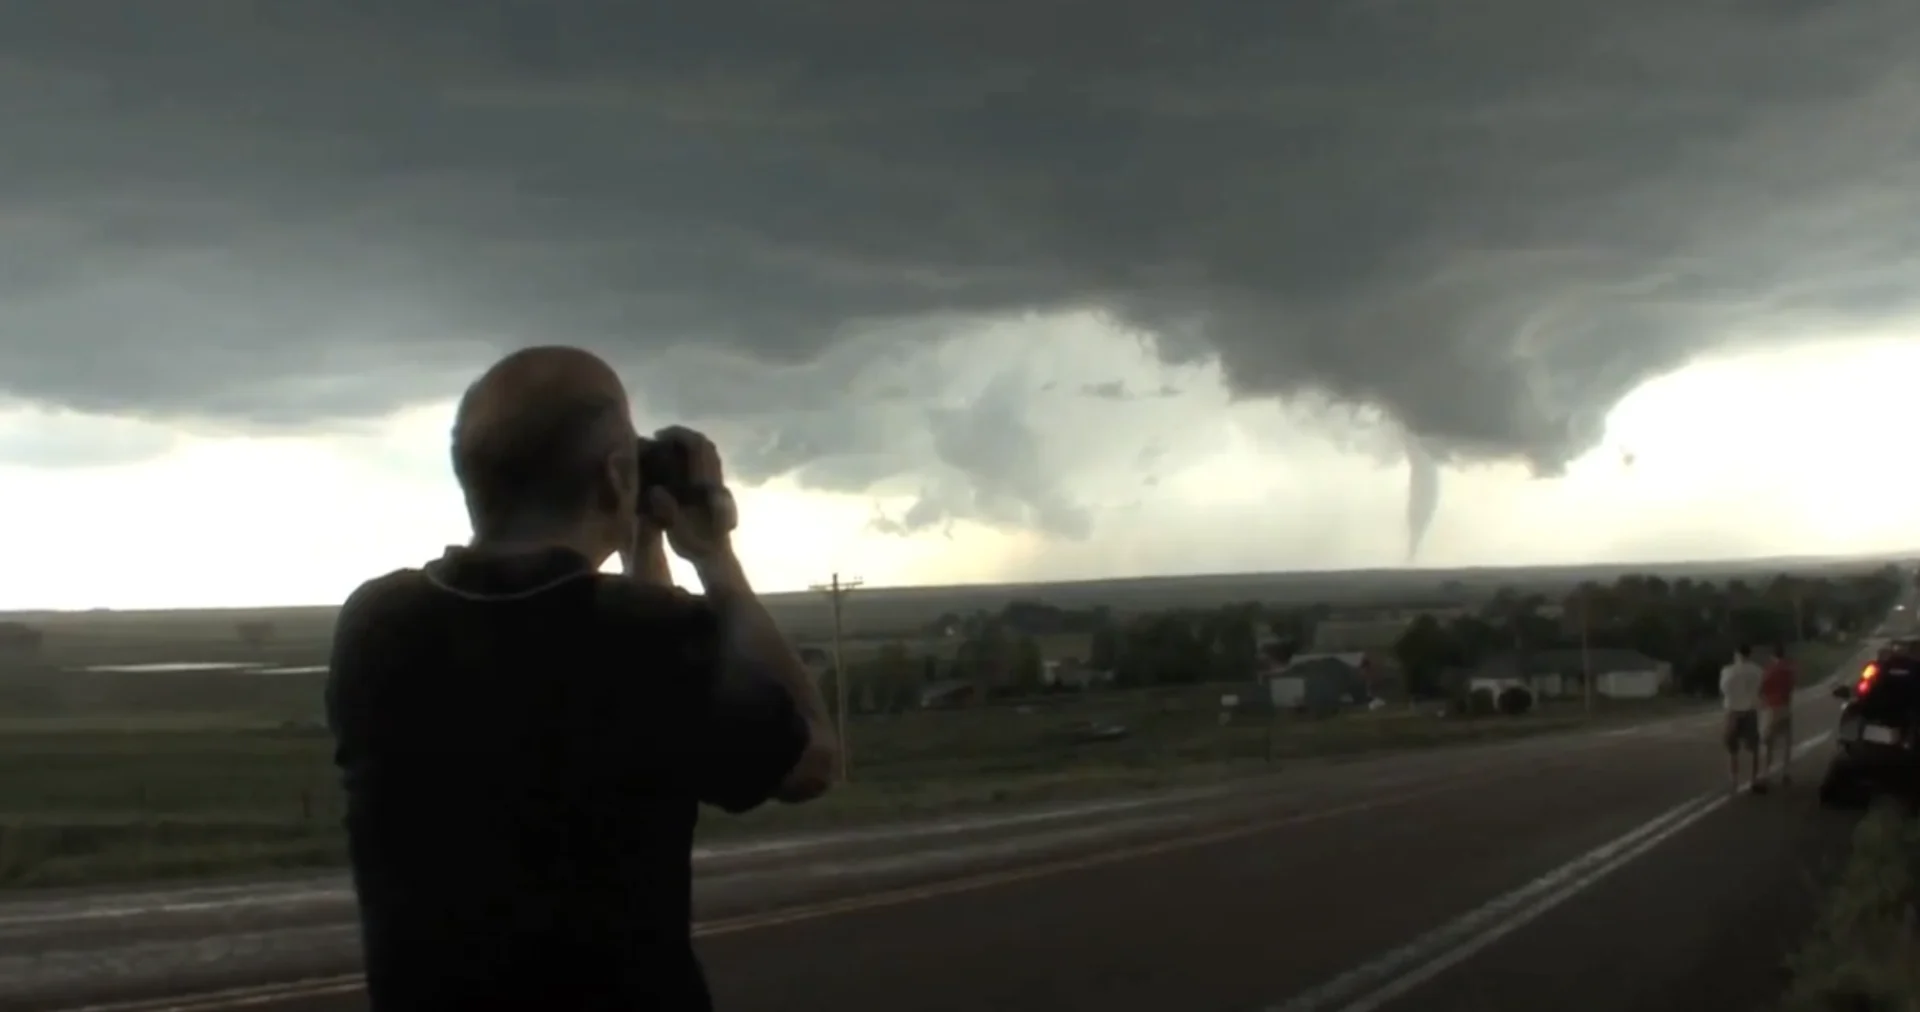 What do storm chasers really do? Two tornado scientists take us inside the chase